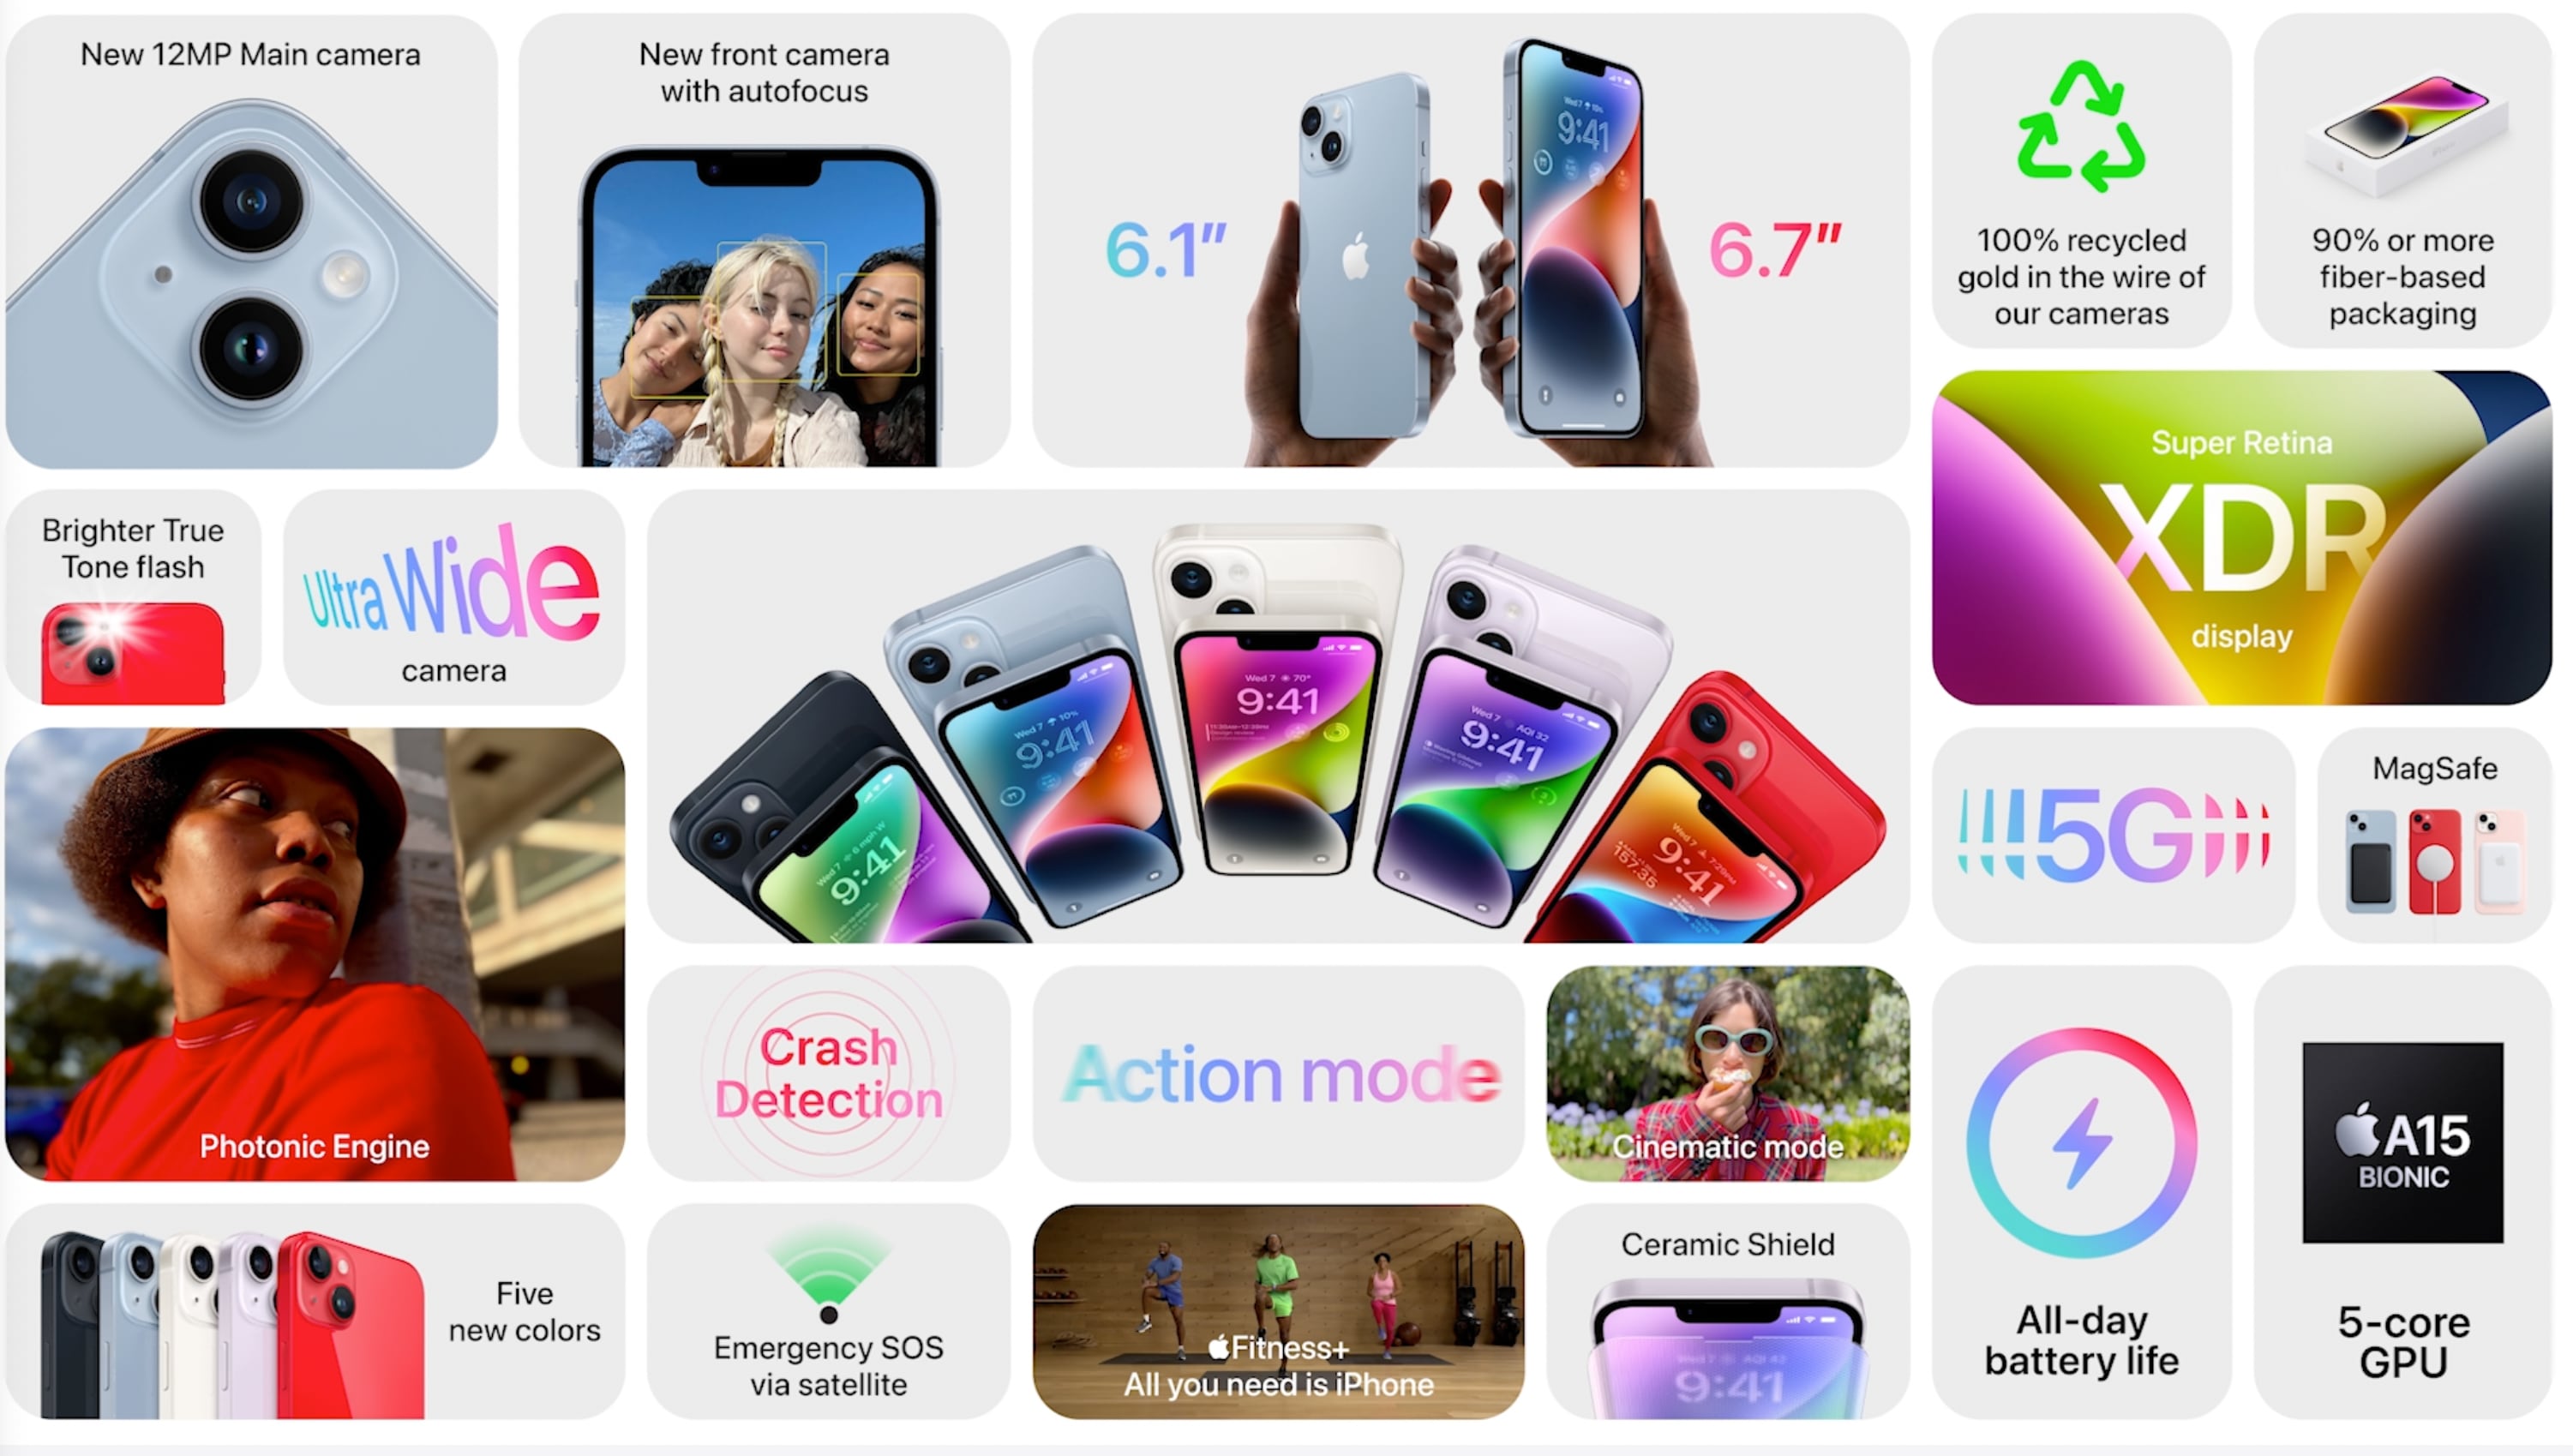 Apple Event 2022 releases iPhone 14 with new features